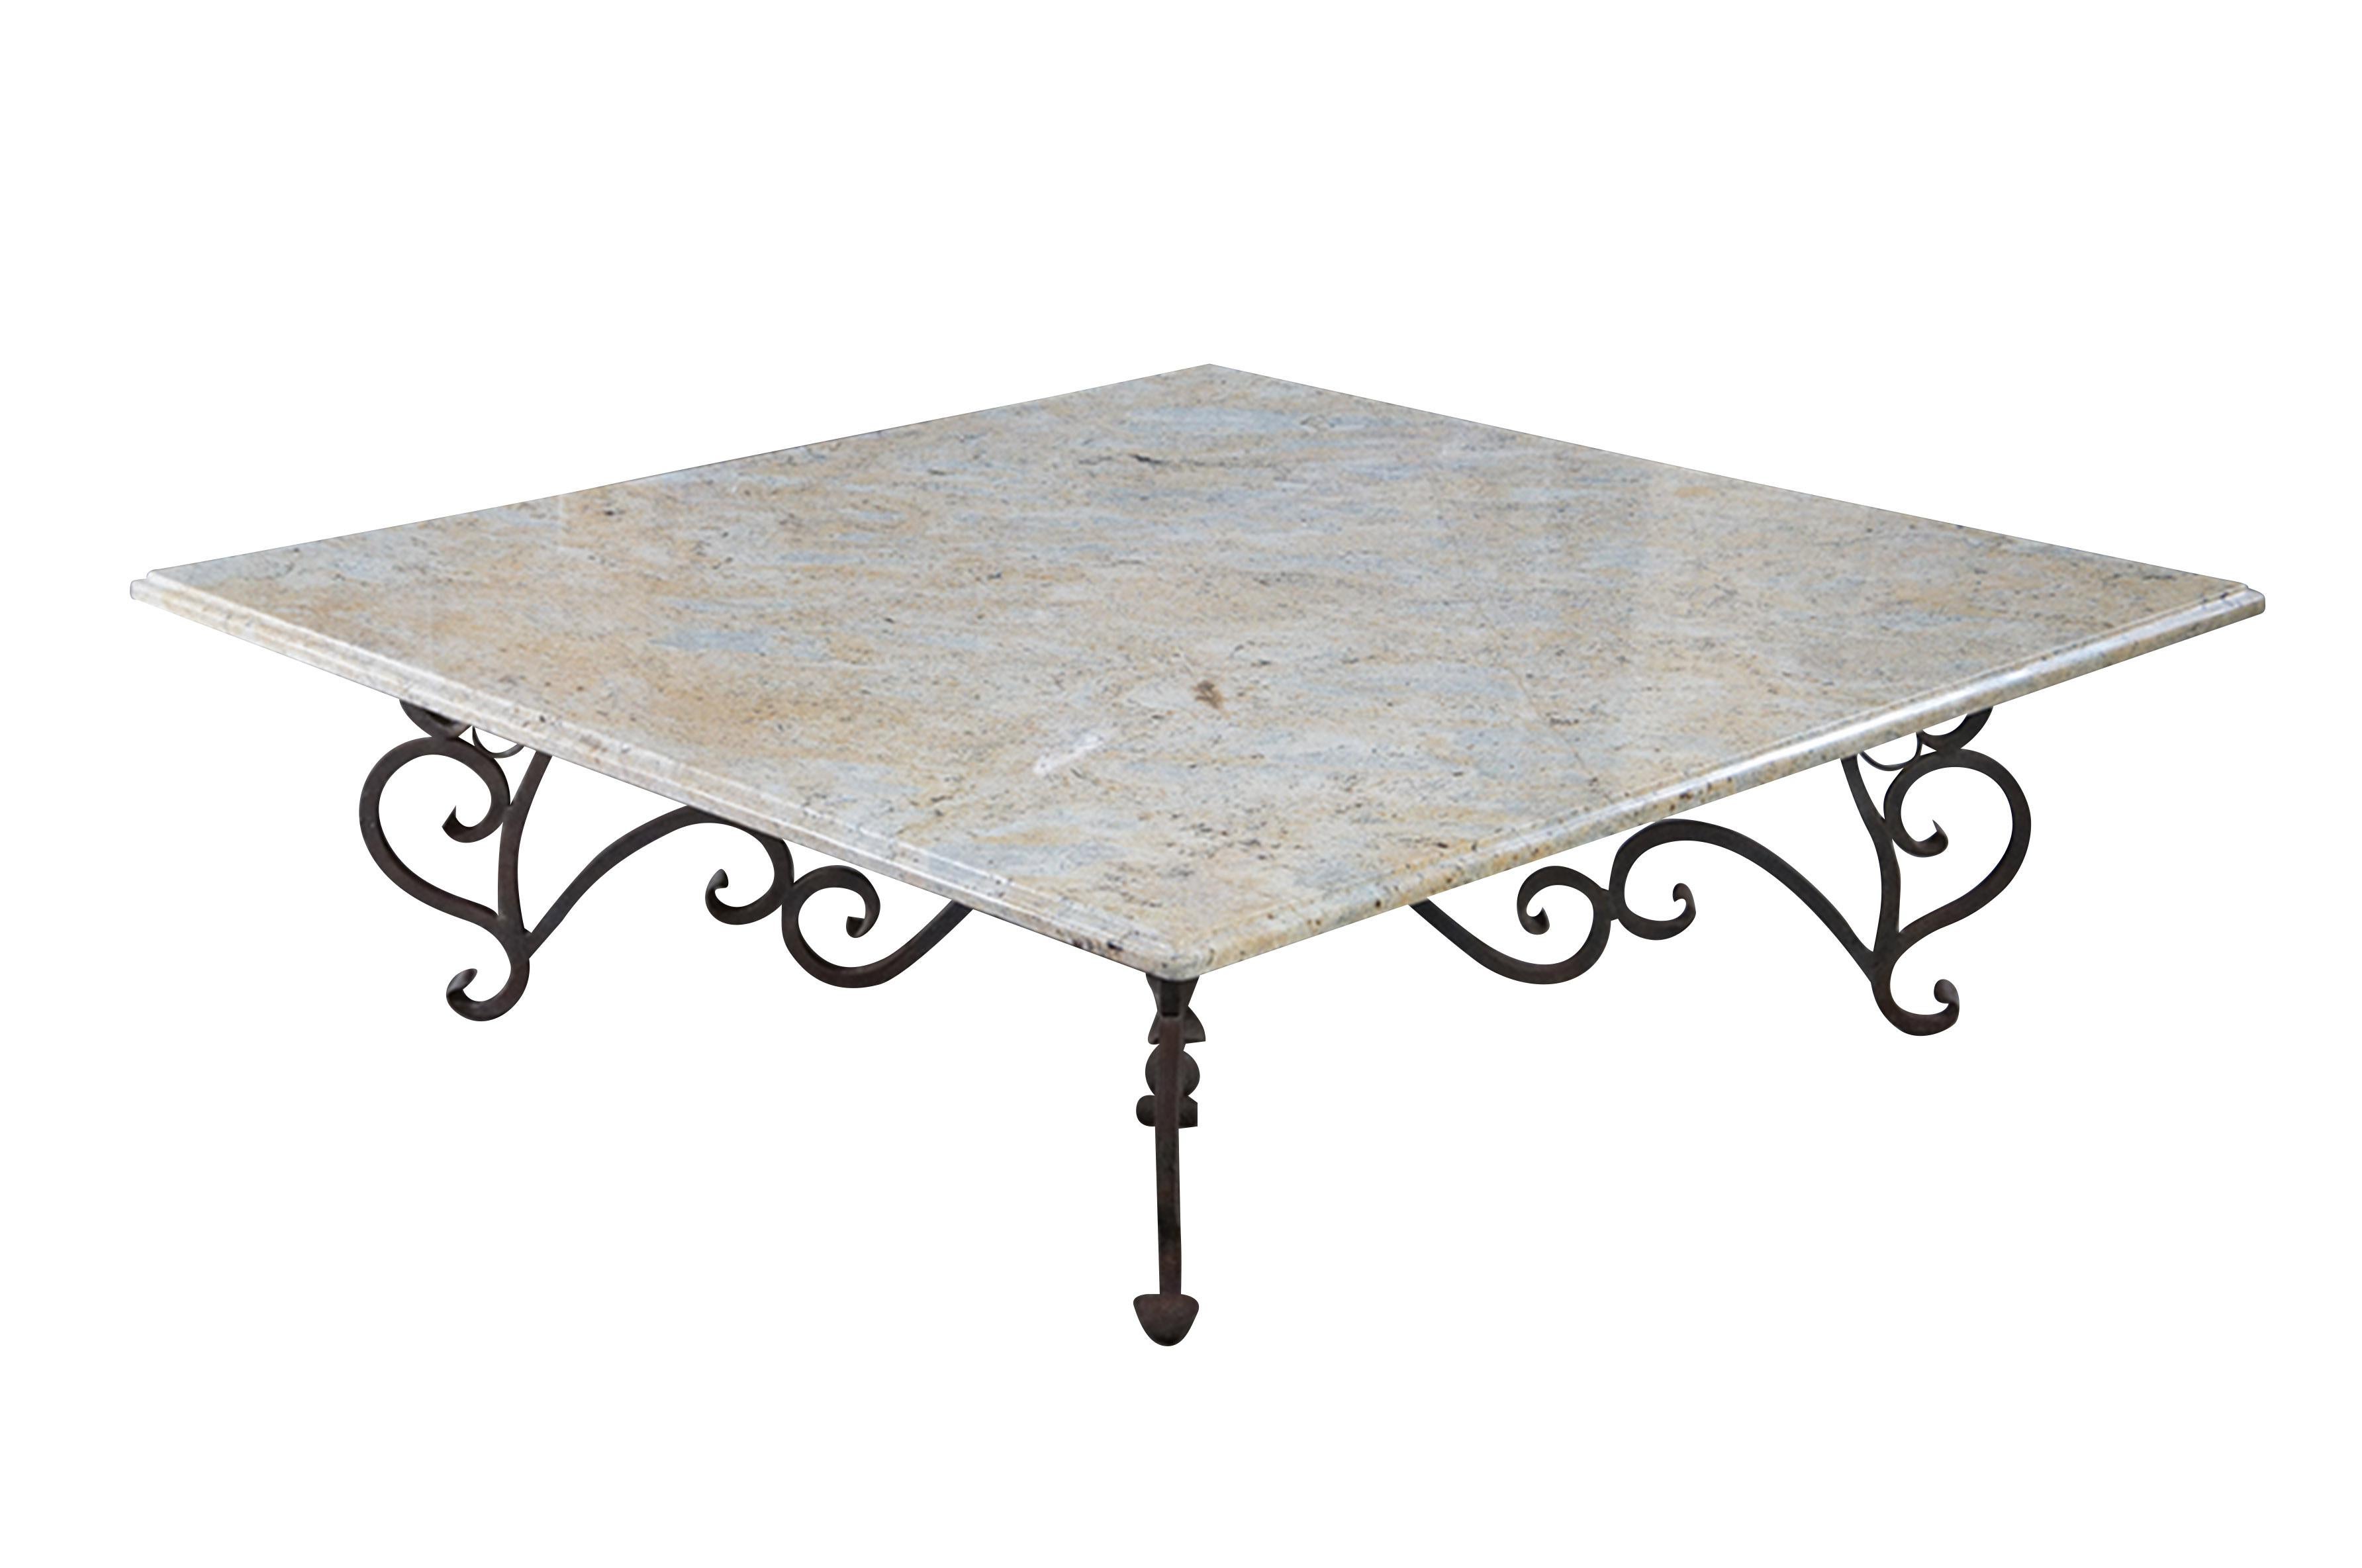 A large and impressive coffee table featuring square form with French scrolled / serpentine wrought iron base and heavy Granite stone top with beveled edge.  Very heavy.

Dimensions:
60